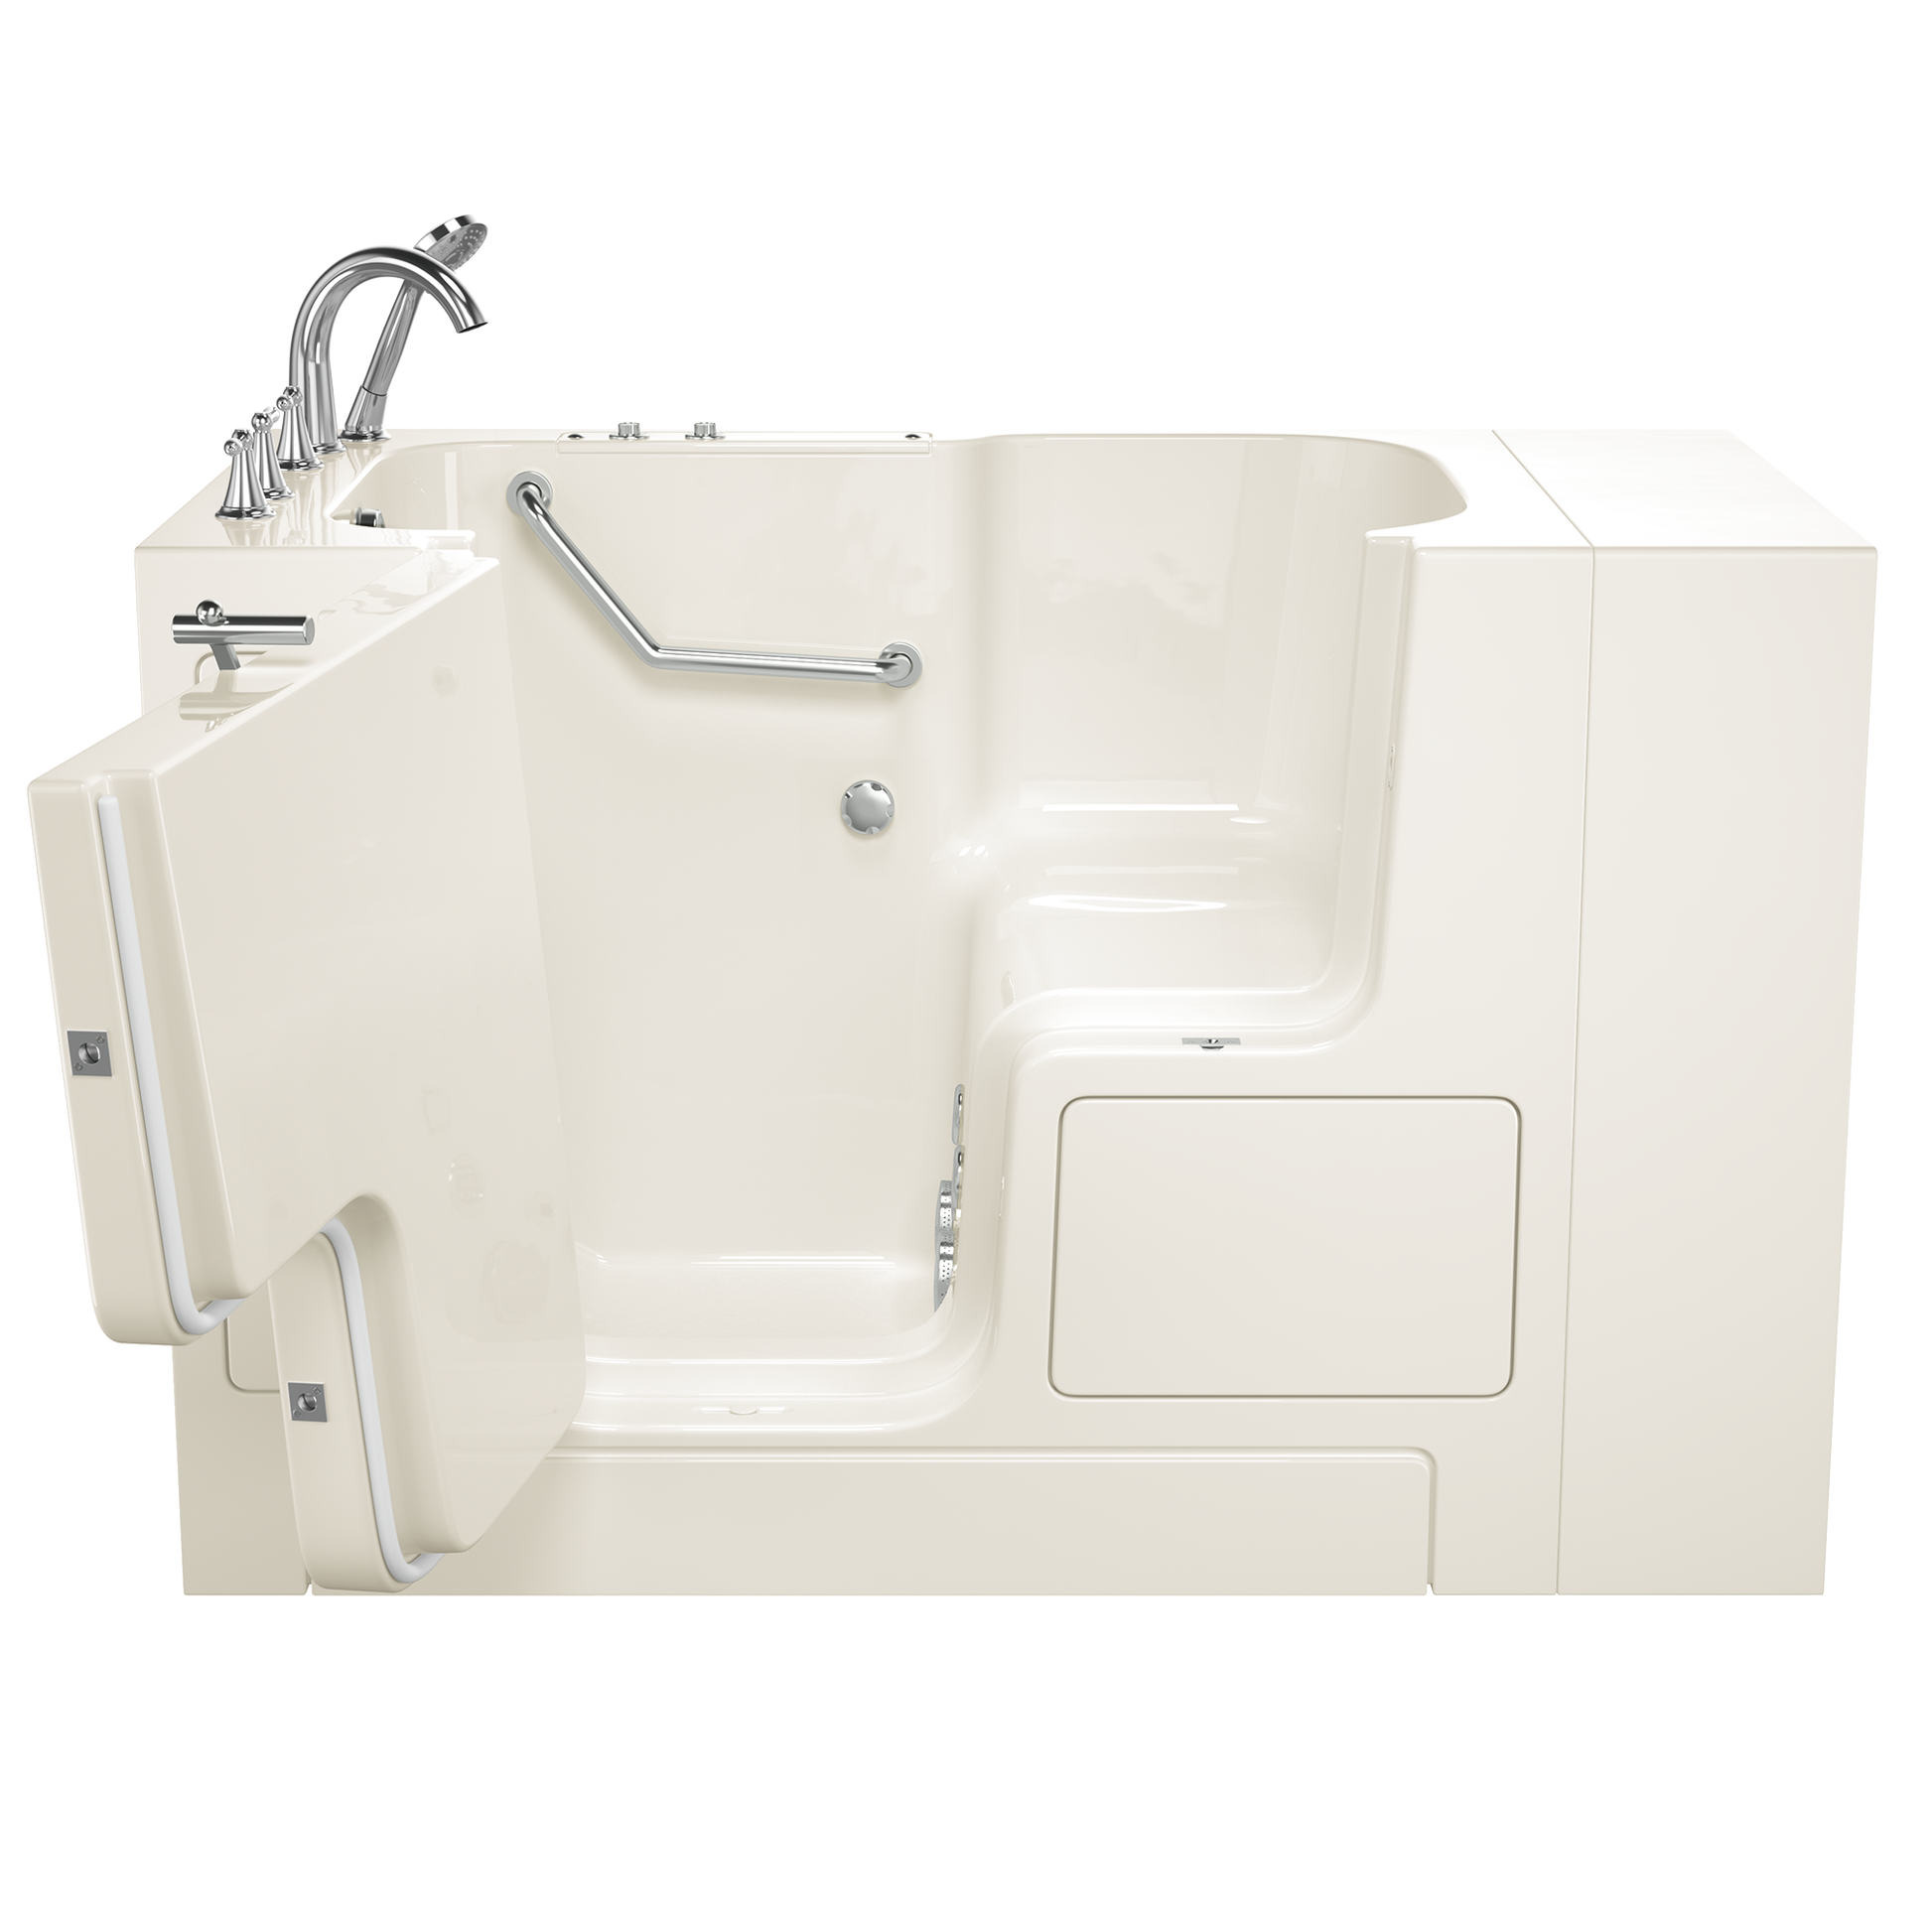 AMERICAN-STANDARD SS9OD5232LJ-BC-PC, Gelcoat Premium Series 32 in. x 52 in. Outward Opening Door Walk-In Bathtub with Whirlpool system in Wib Linen